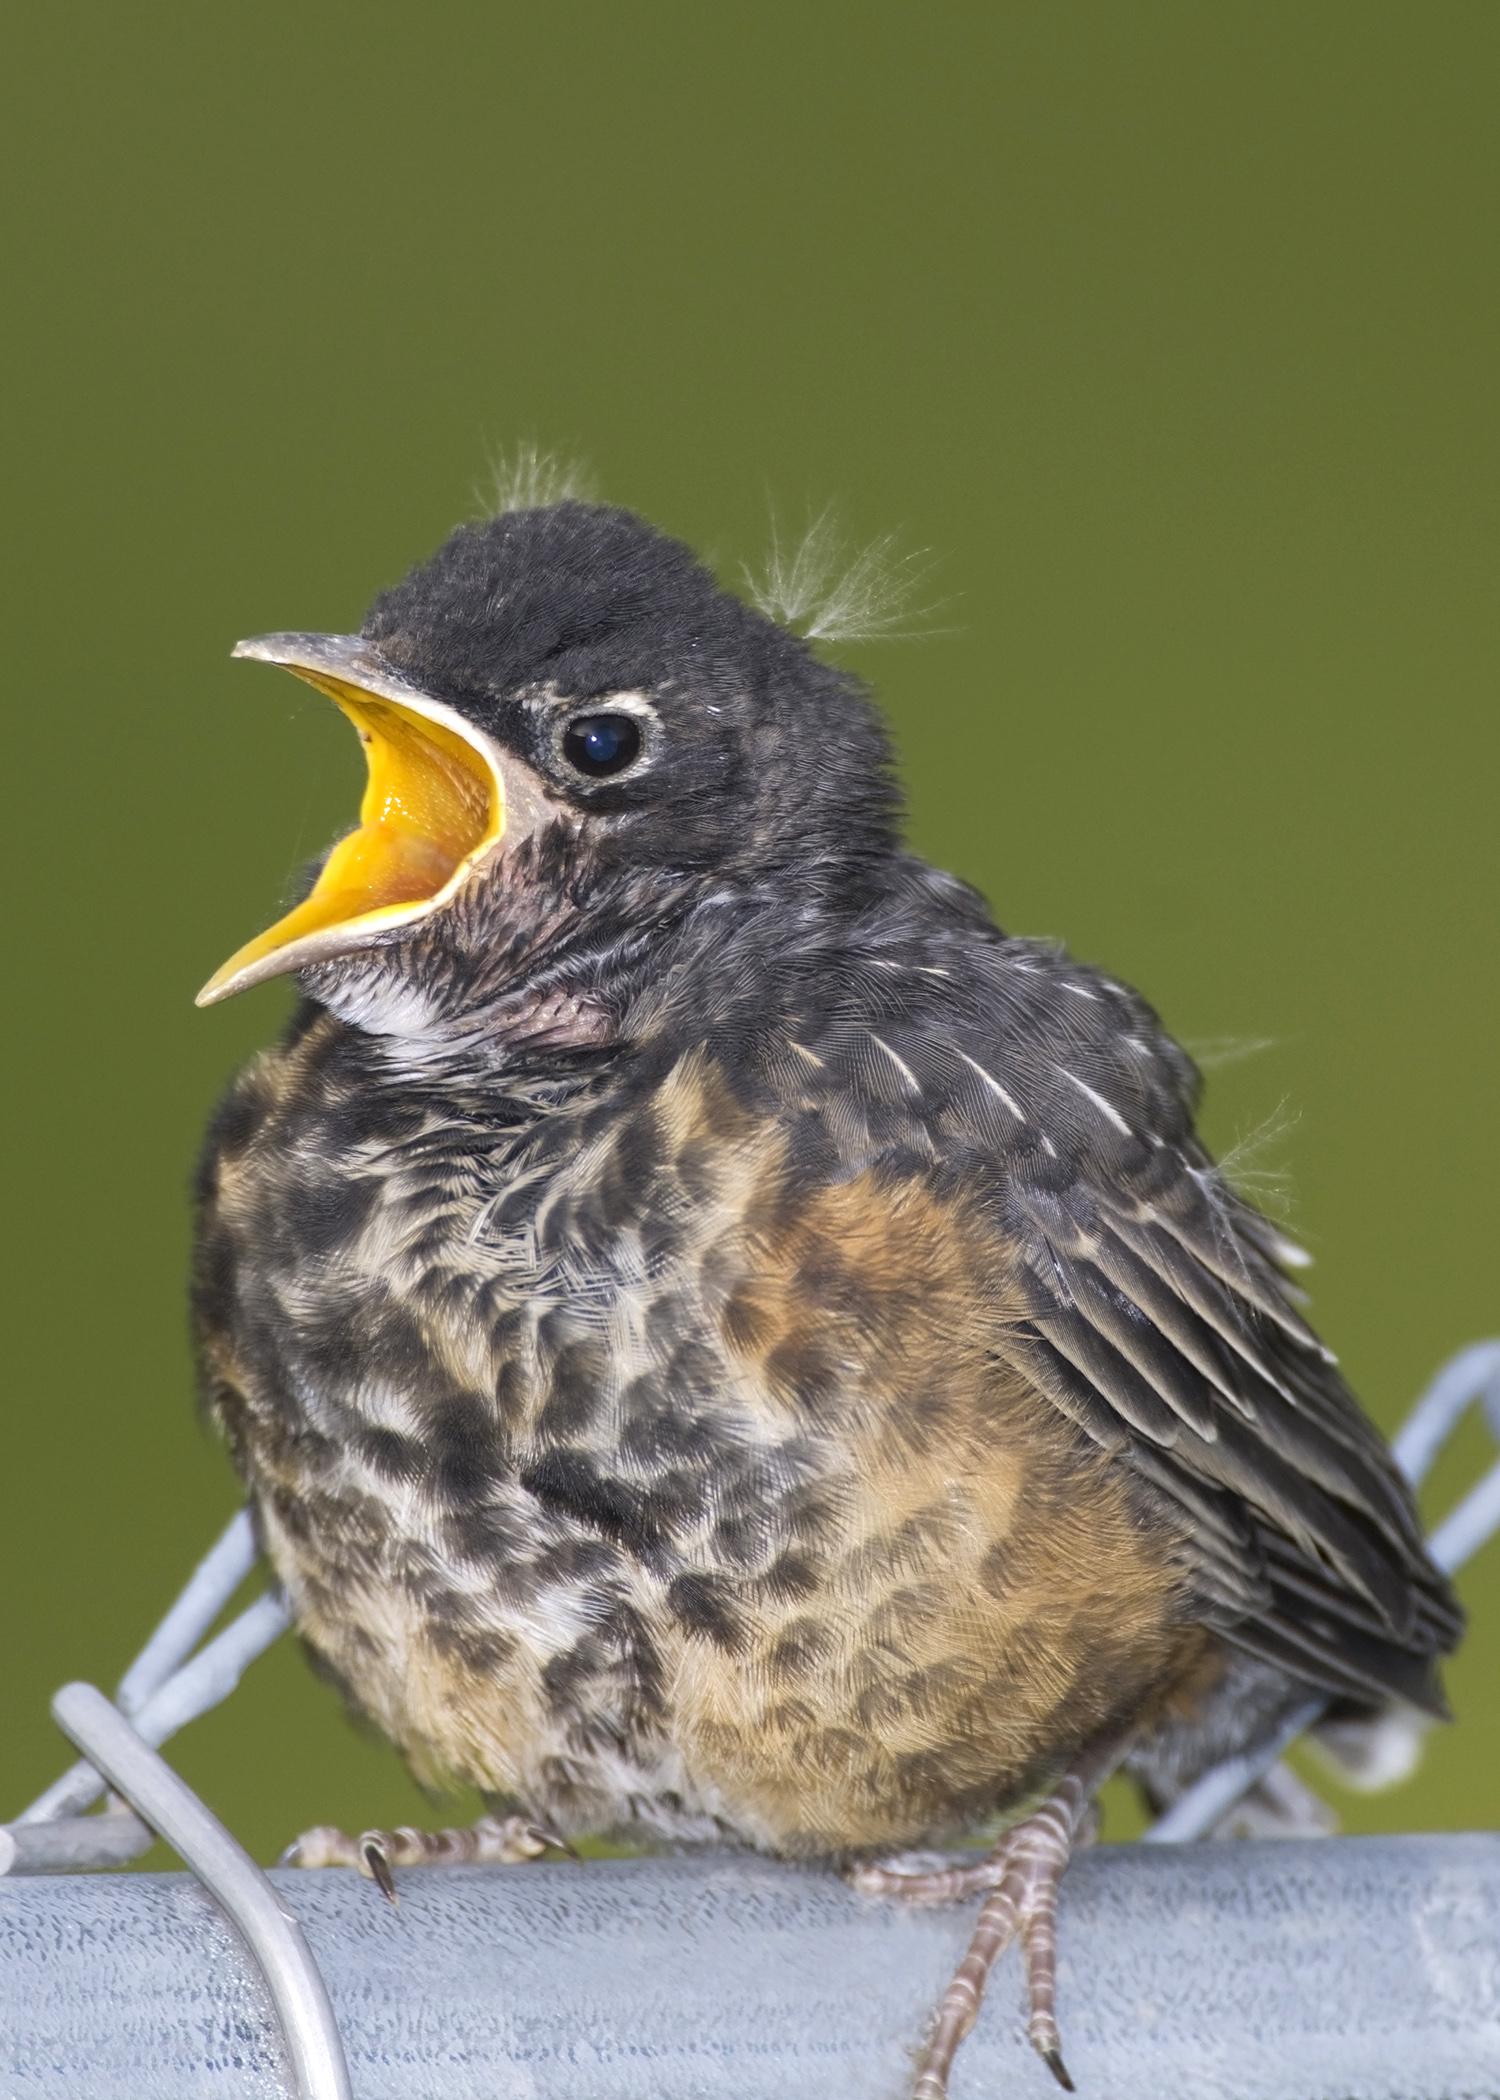 Baby wild animals, such as this robin, may appear abandoned, but usually a parent is nearby. Humans should let nature take its course. (Submitted photo)